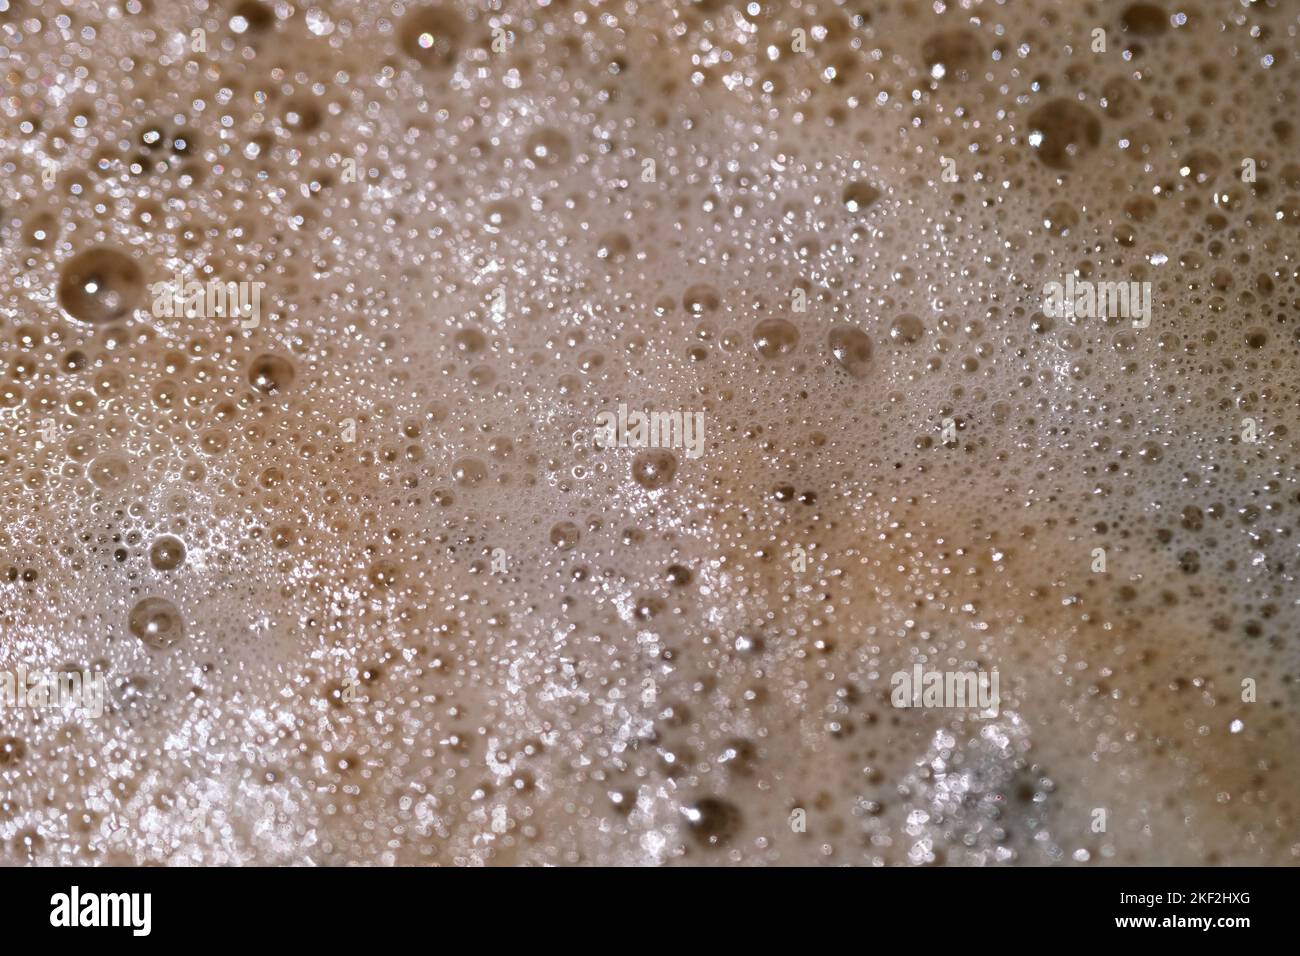 Macro image of froth and bubbles on coffee. Brown and white colour. Close up liquid texture. Stock Photo